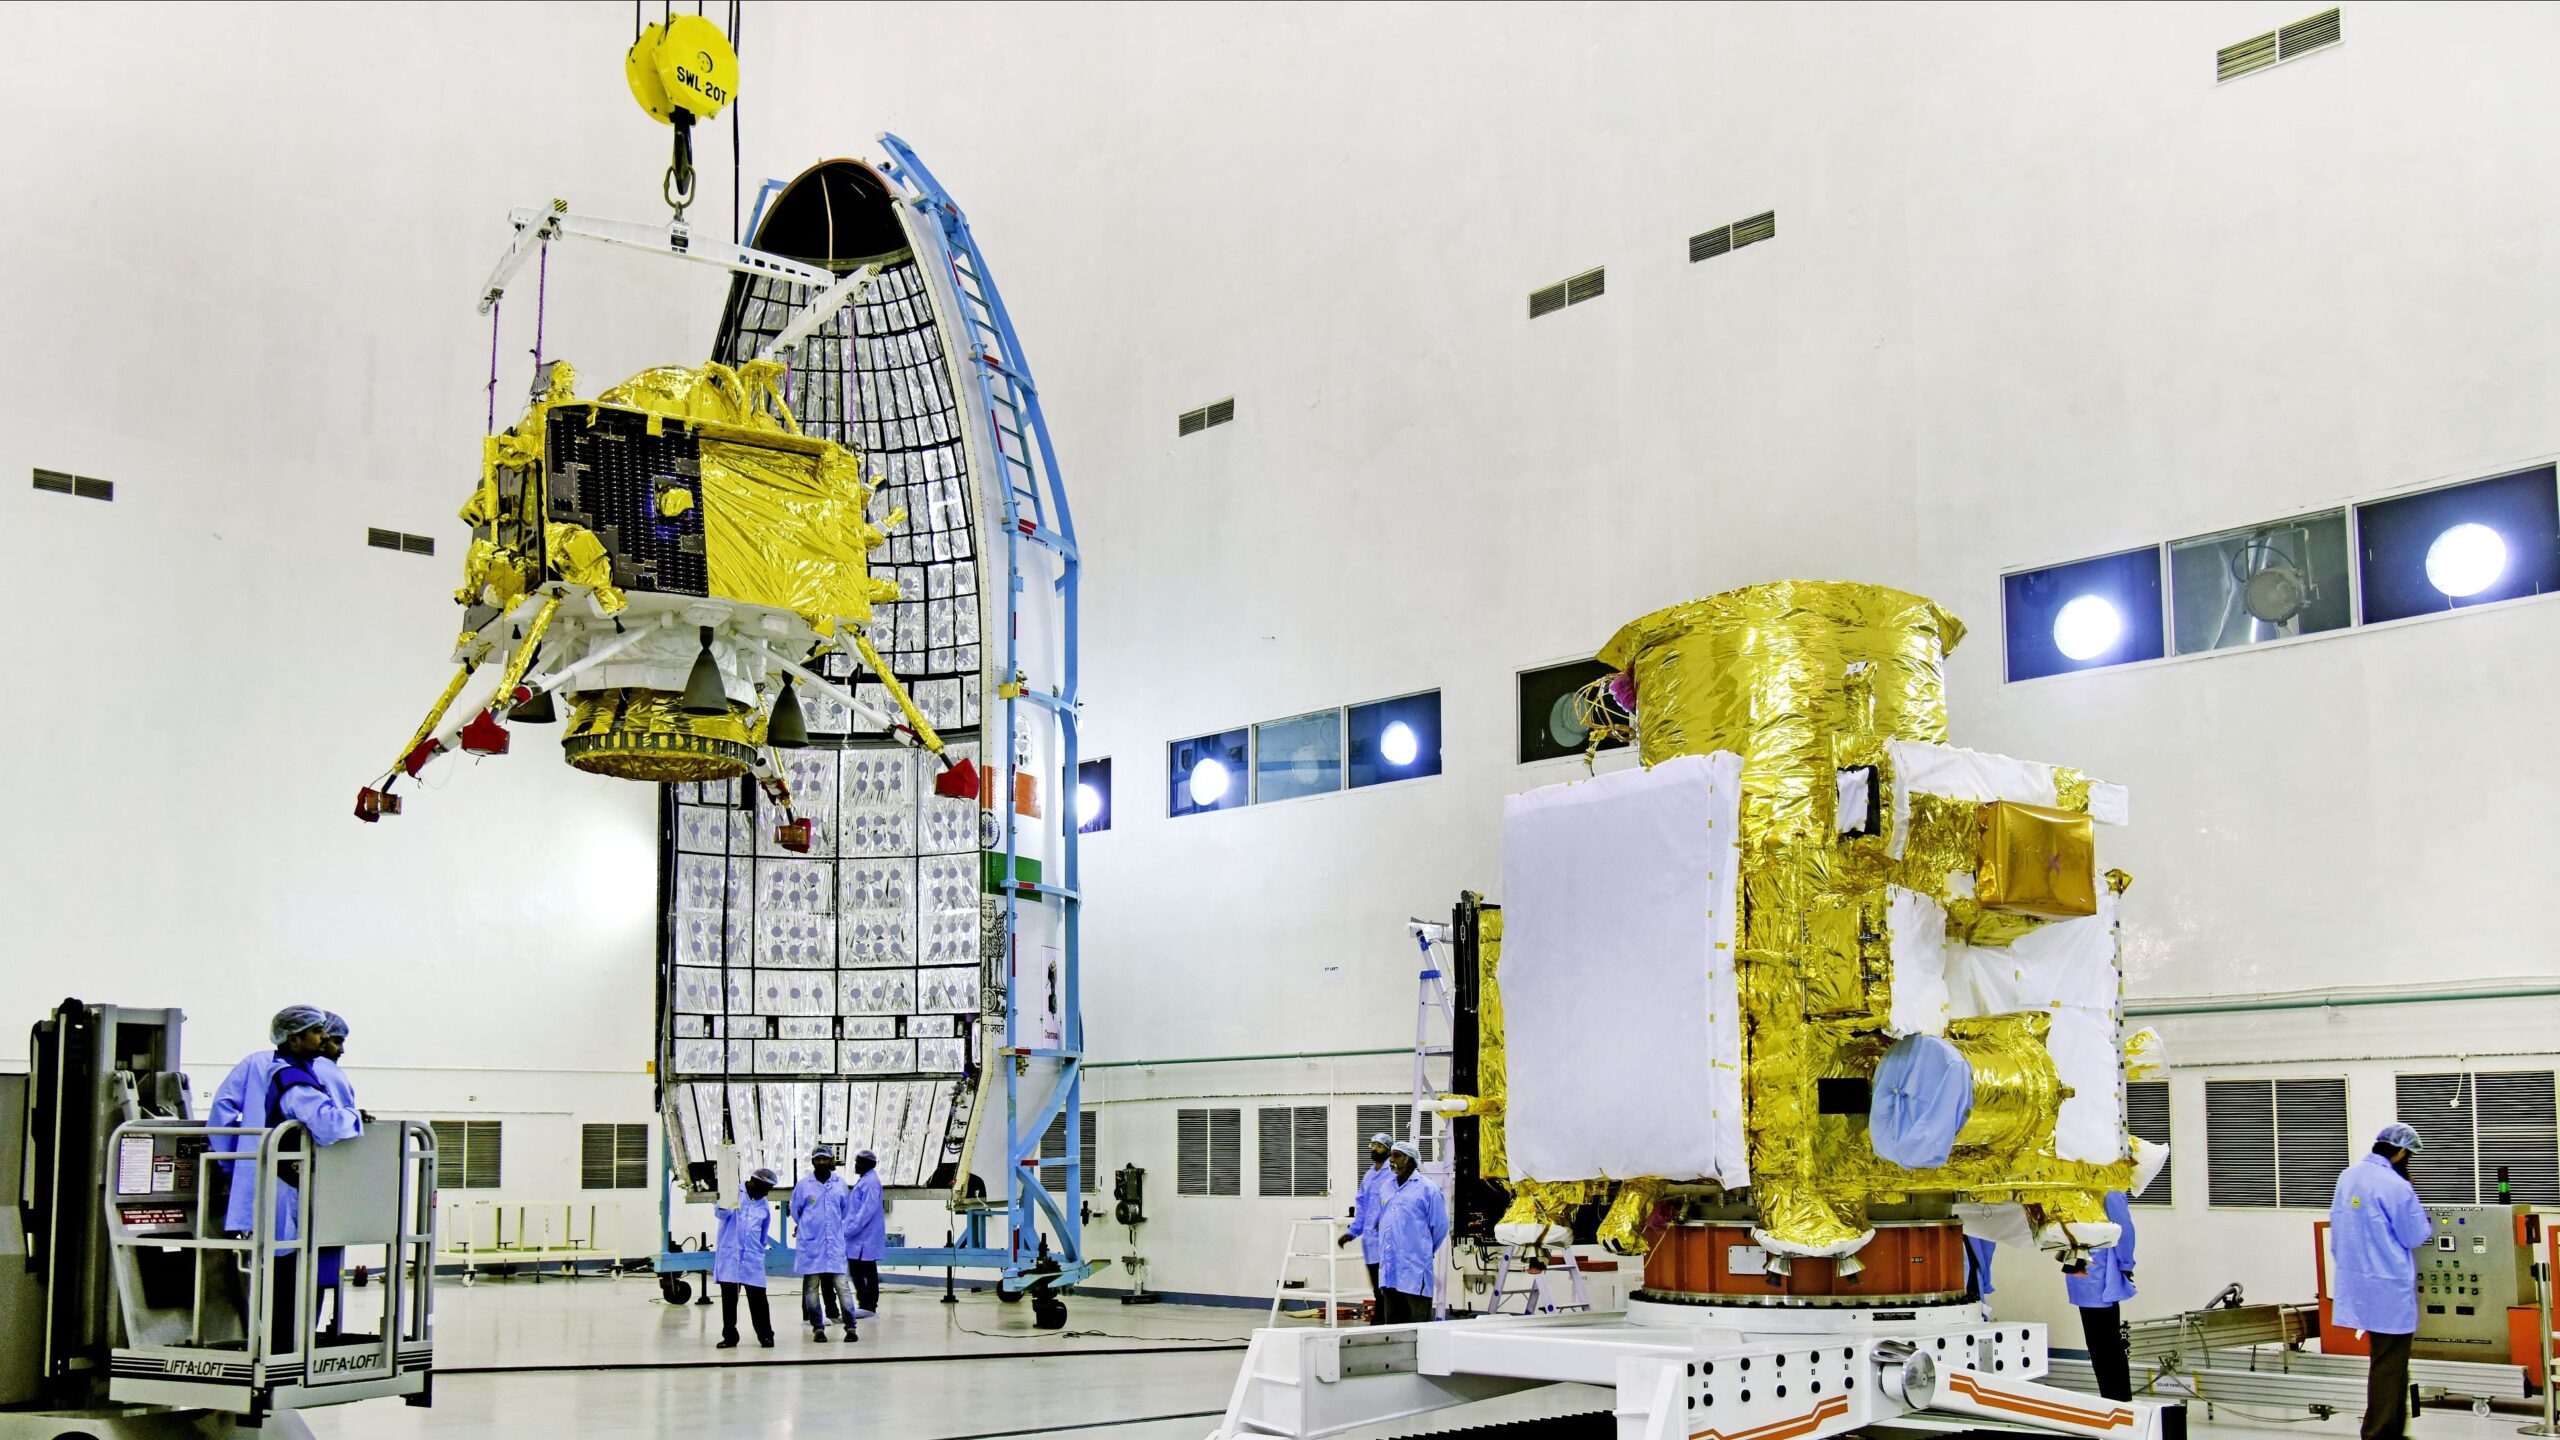 No 5th engine on lander – Indian Defence Research Wing